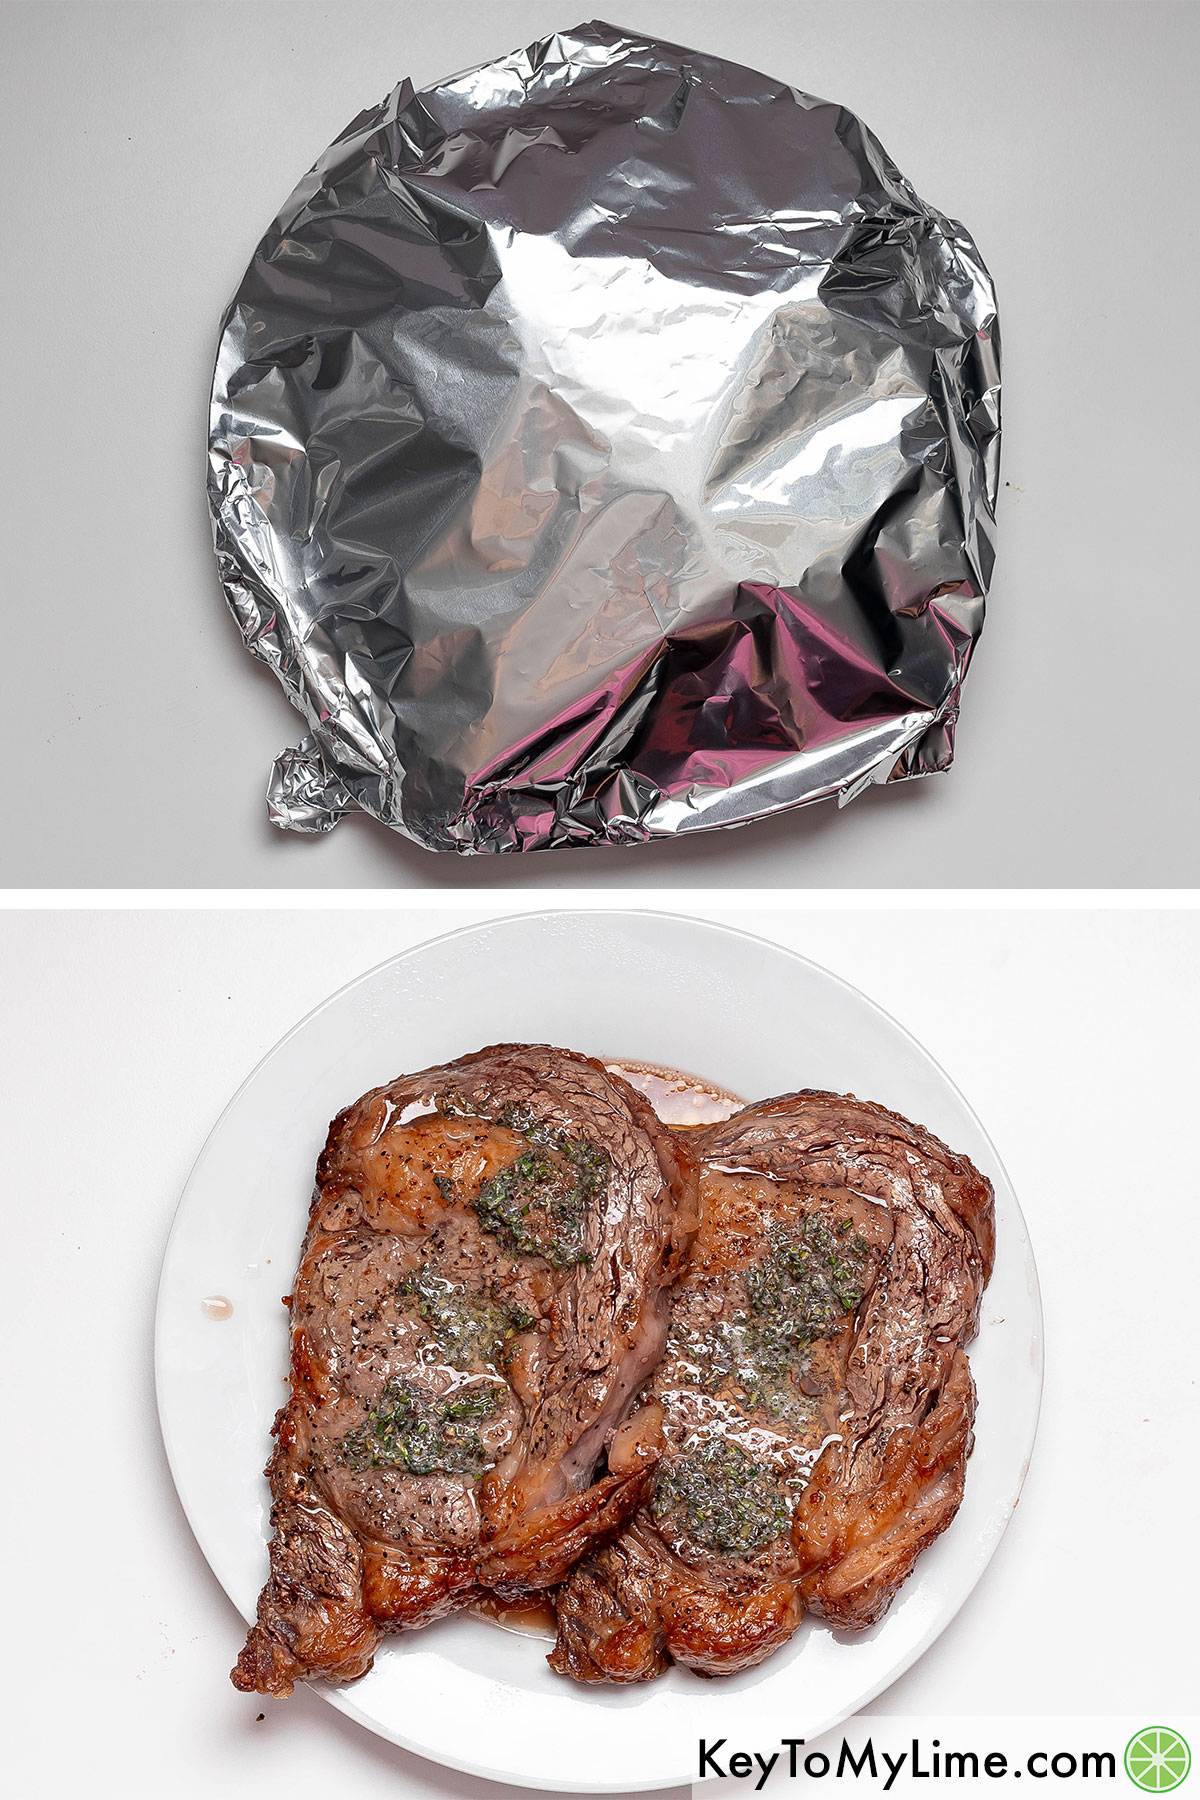 Tenting the cooked steaks with aluminum foil and resting.